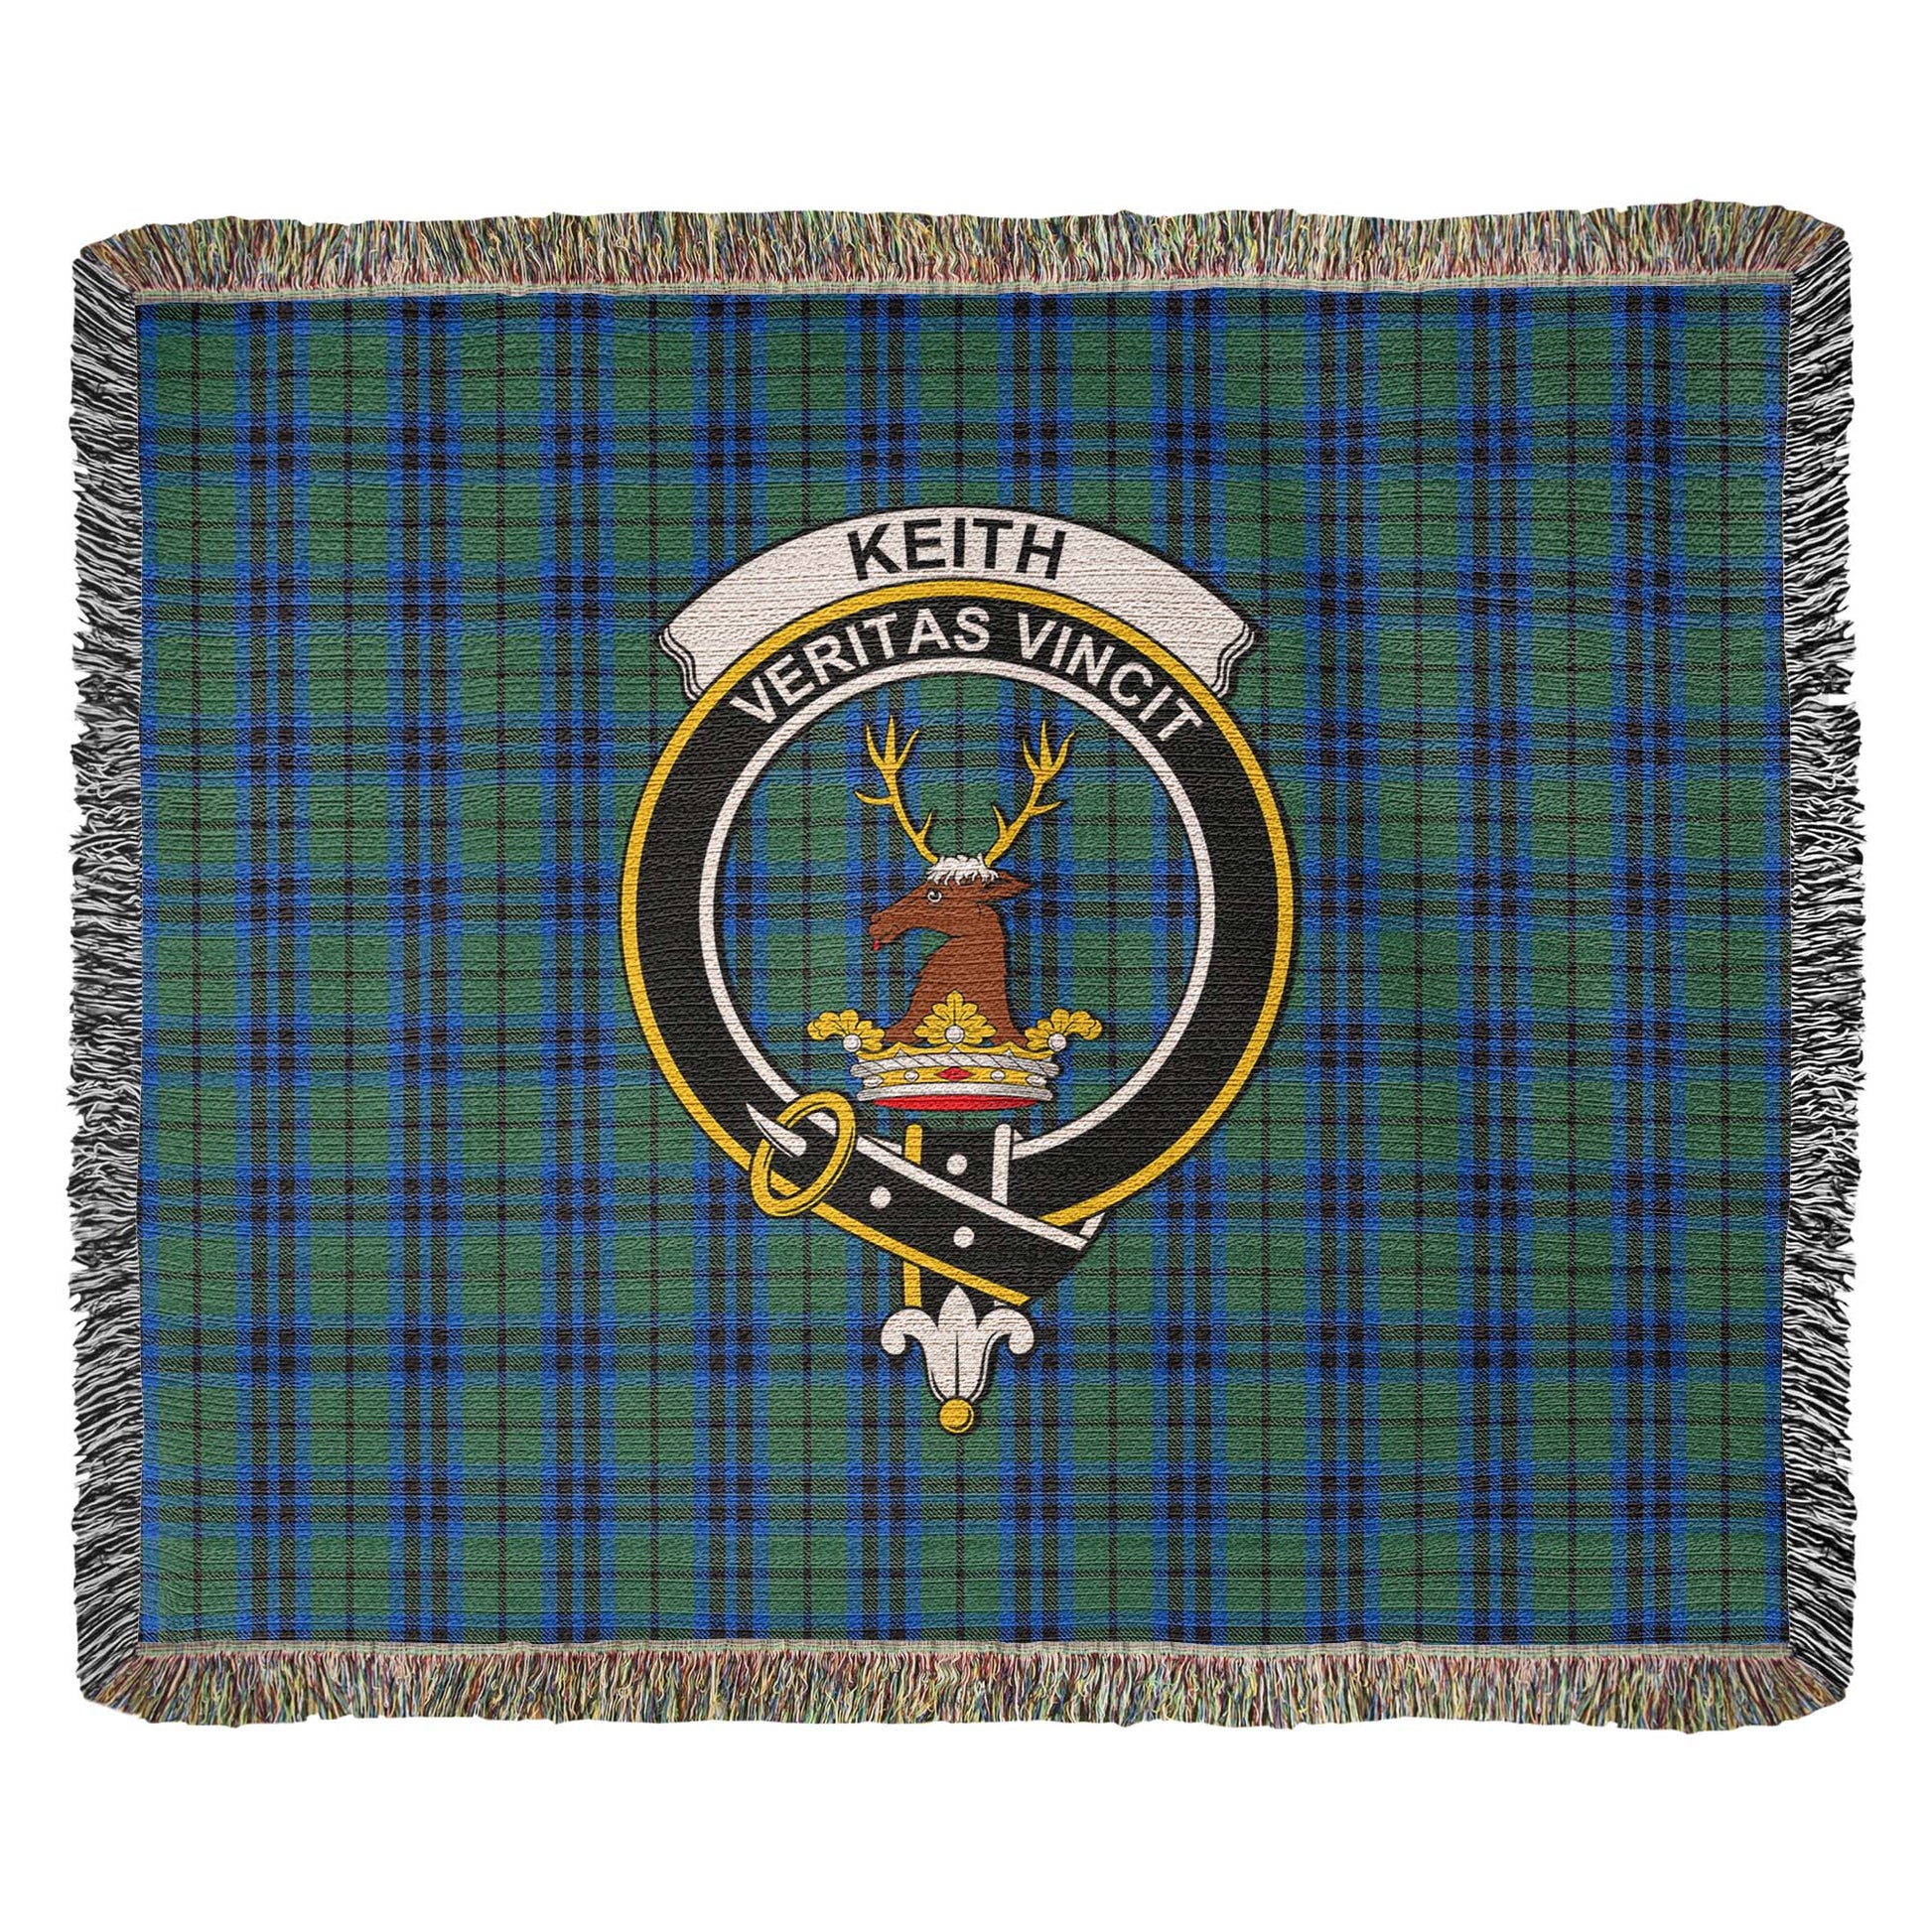 Tartan Vibes Clothing Keith Tartan Woven Blanket with Family Crest